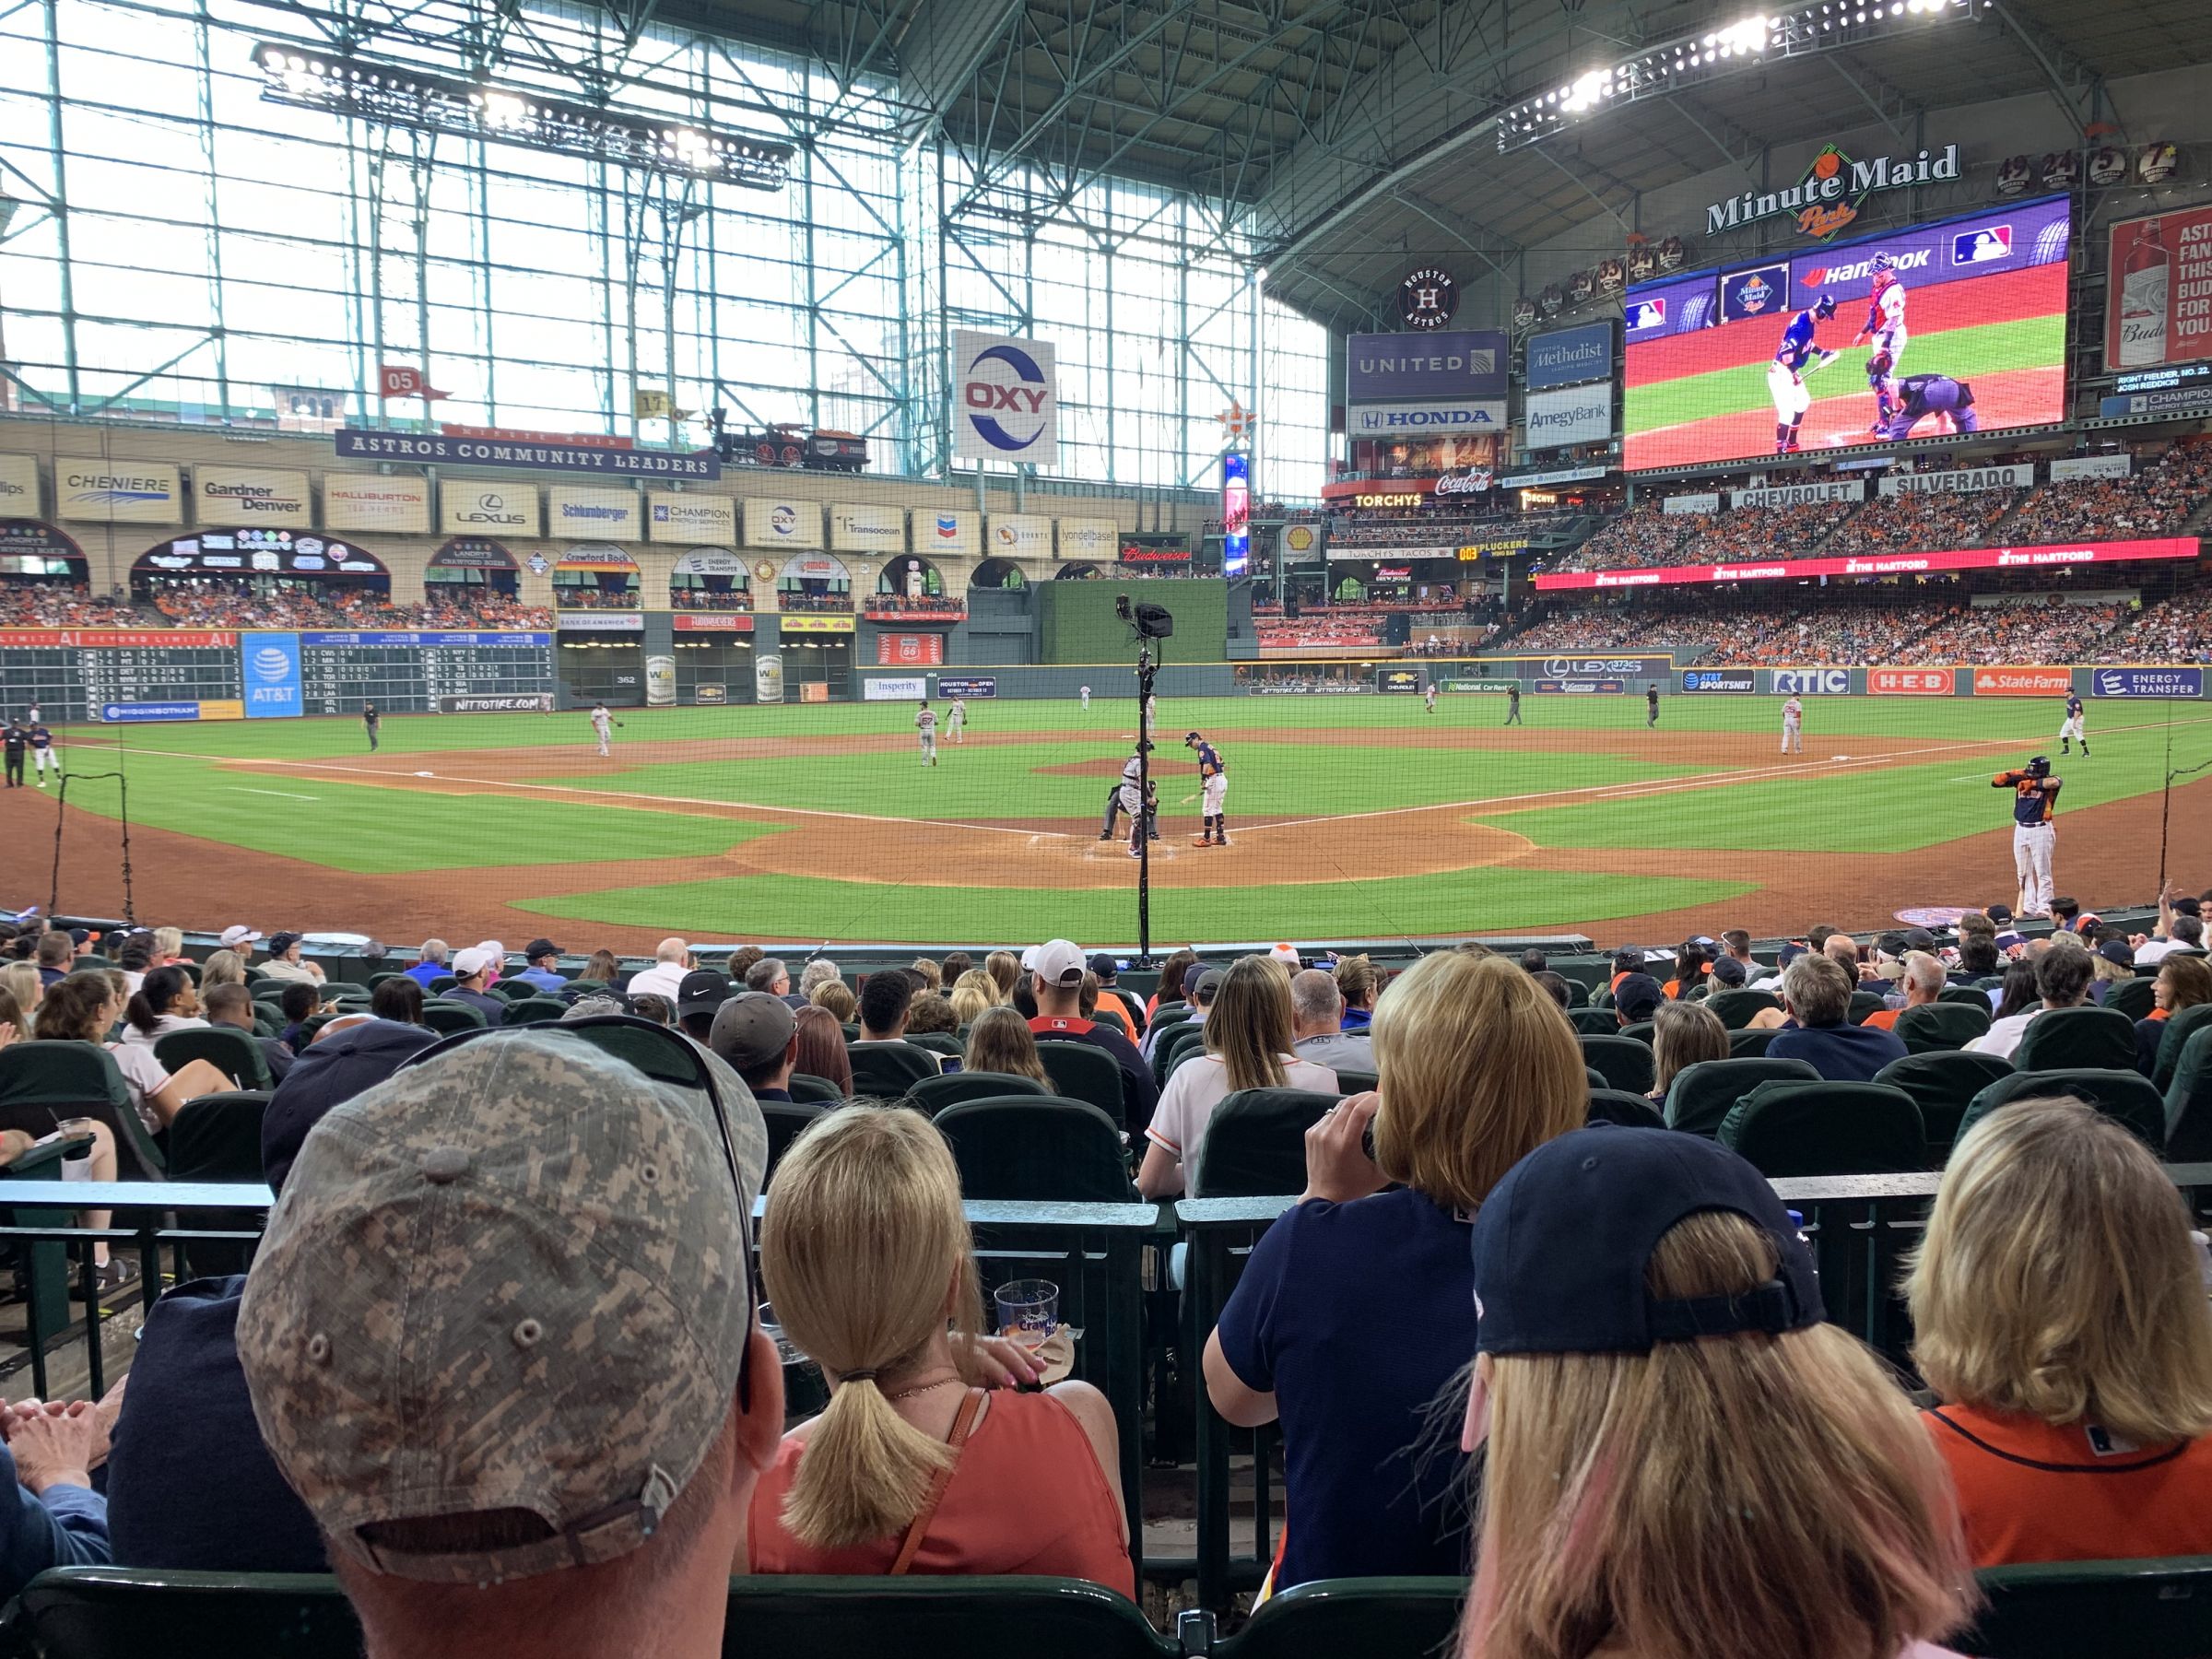 section 119, row 14 seat view  for baseball - minute maid park